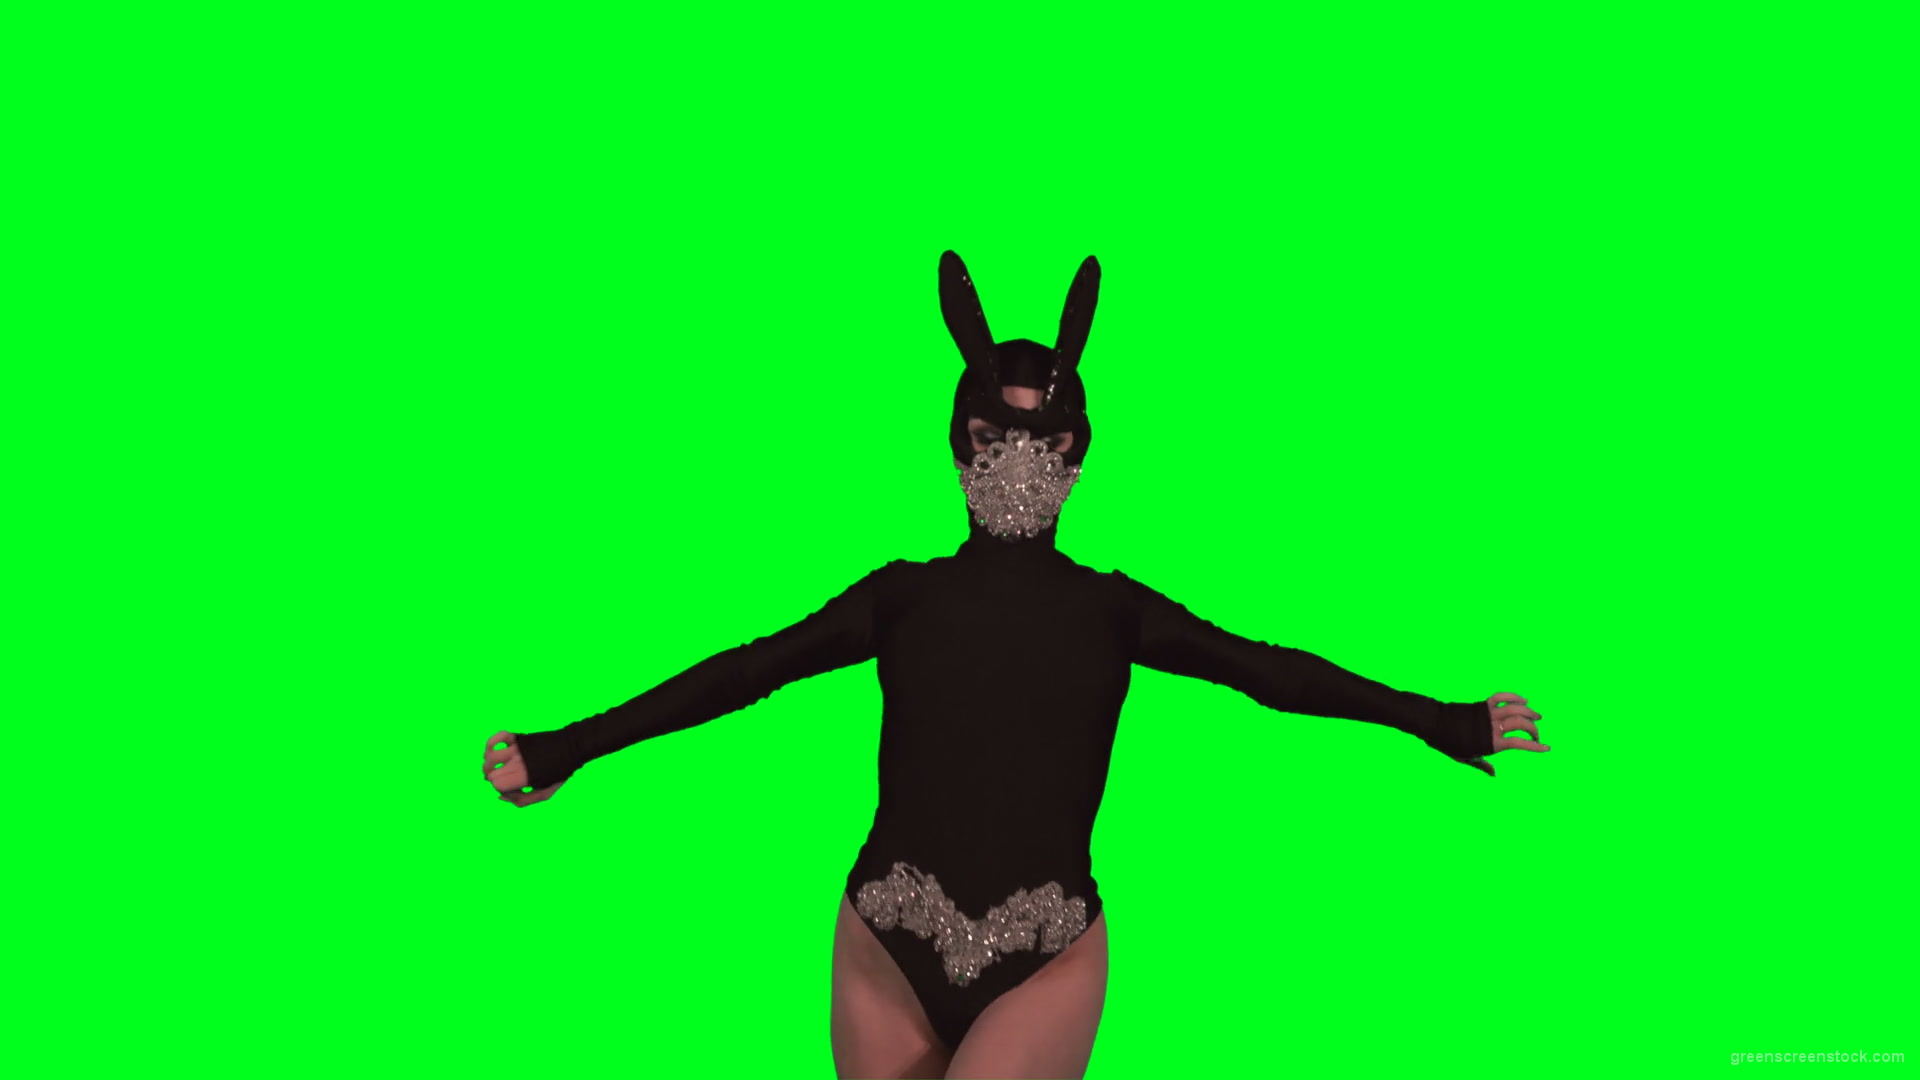 Rave-Calling-EDM-Go-Go-Dancing-Girl-performs-on-green-screen-4K-Video-Footage-1920_007 Green Screen Stock